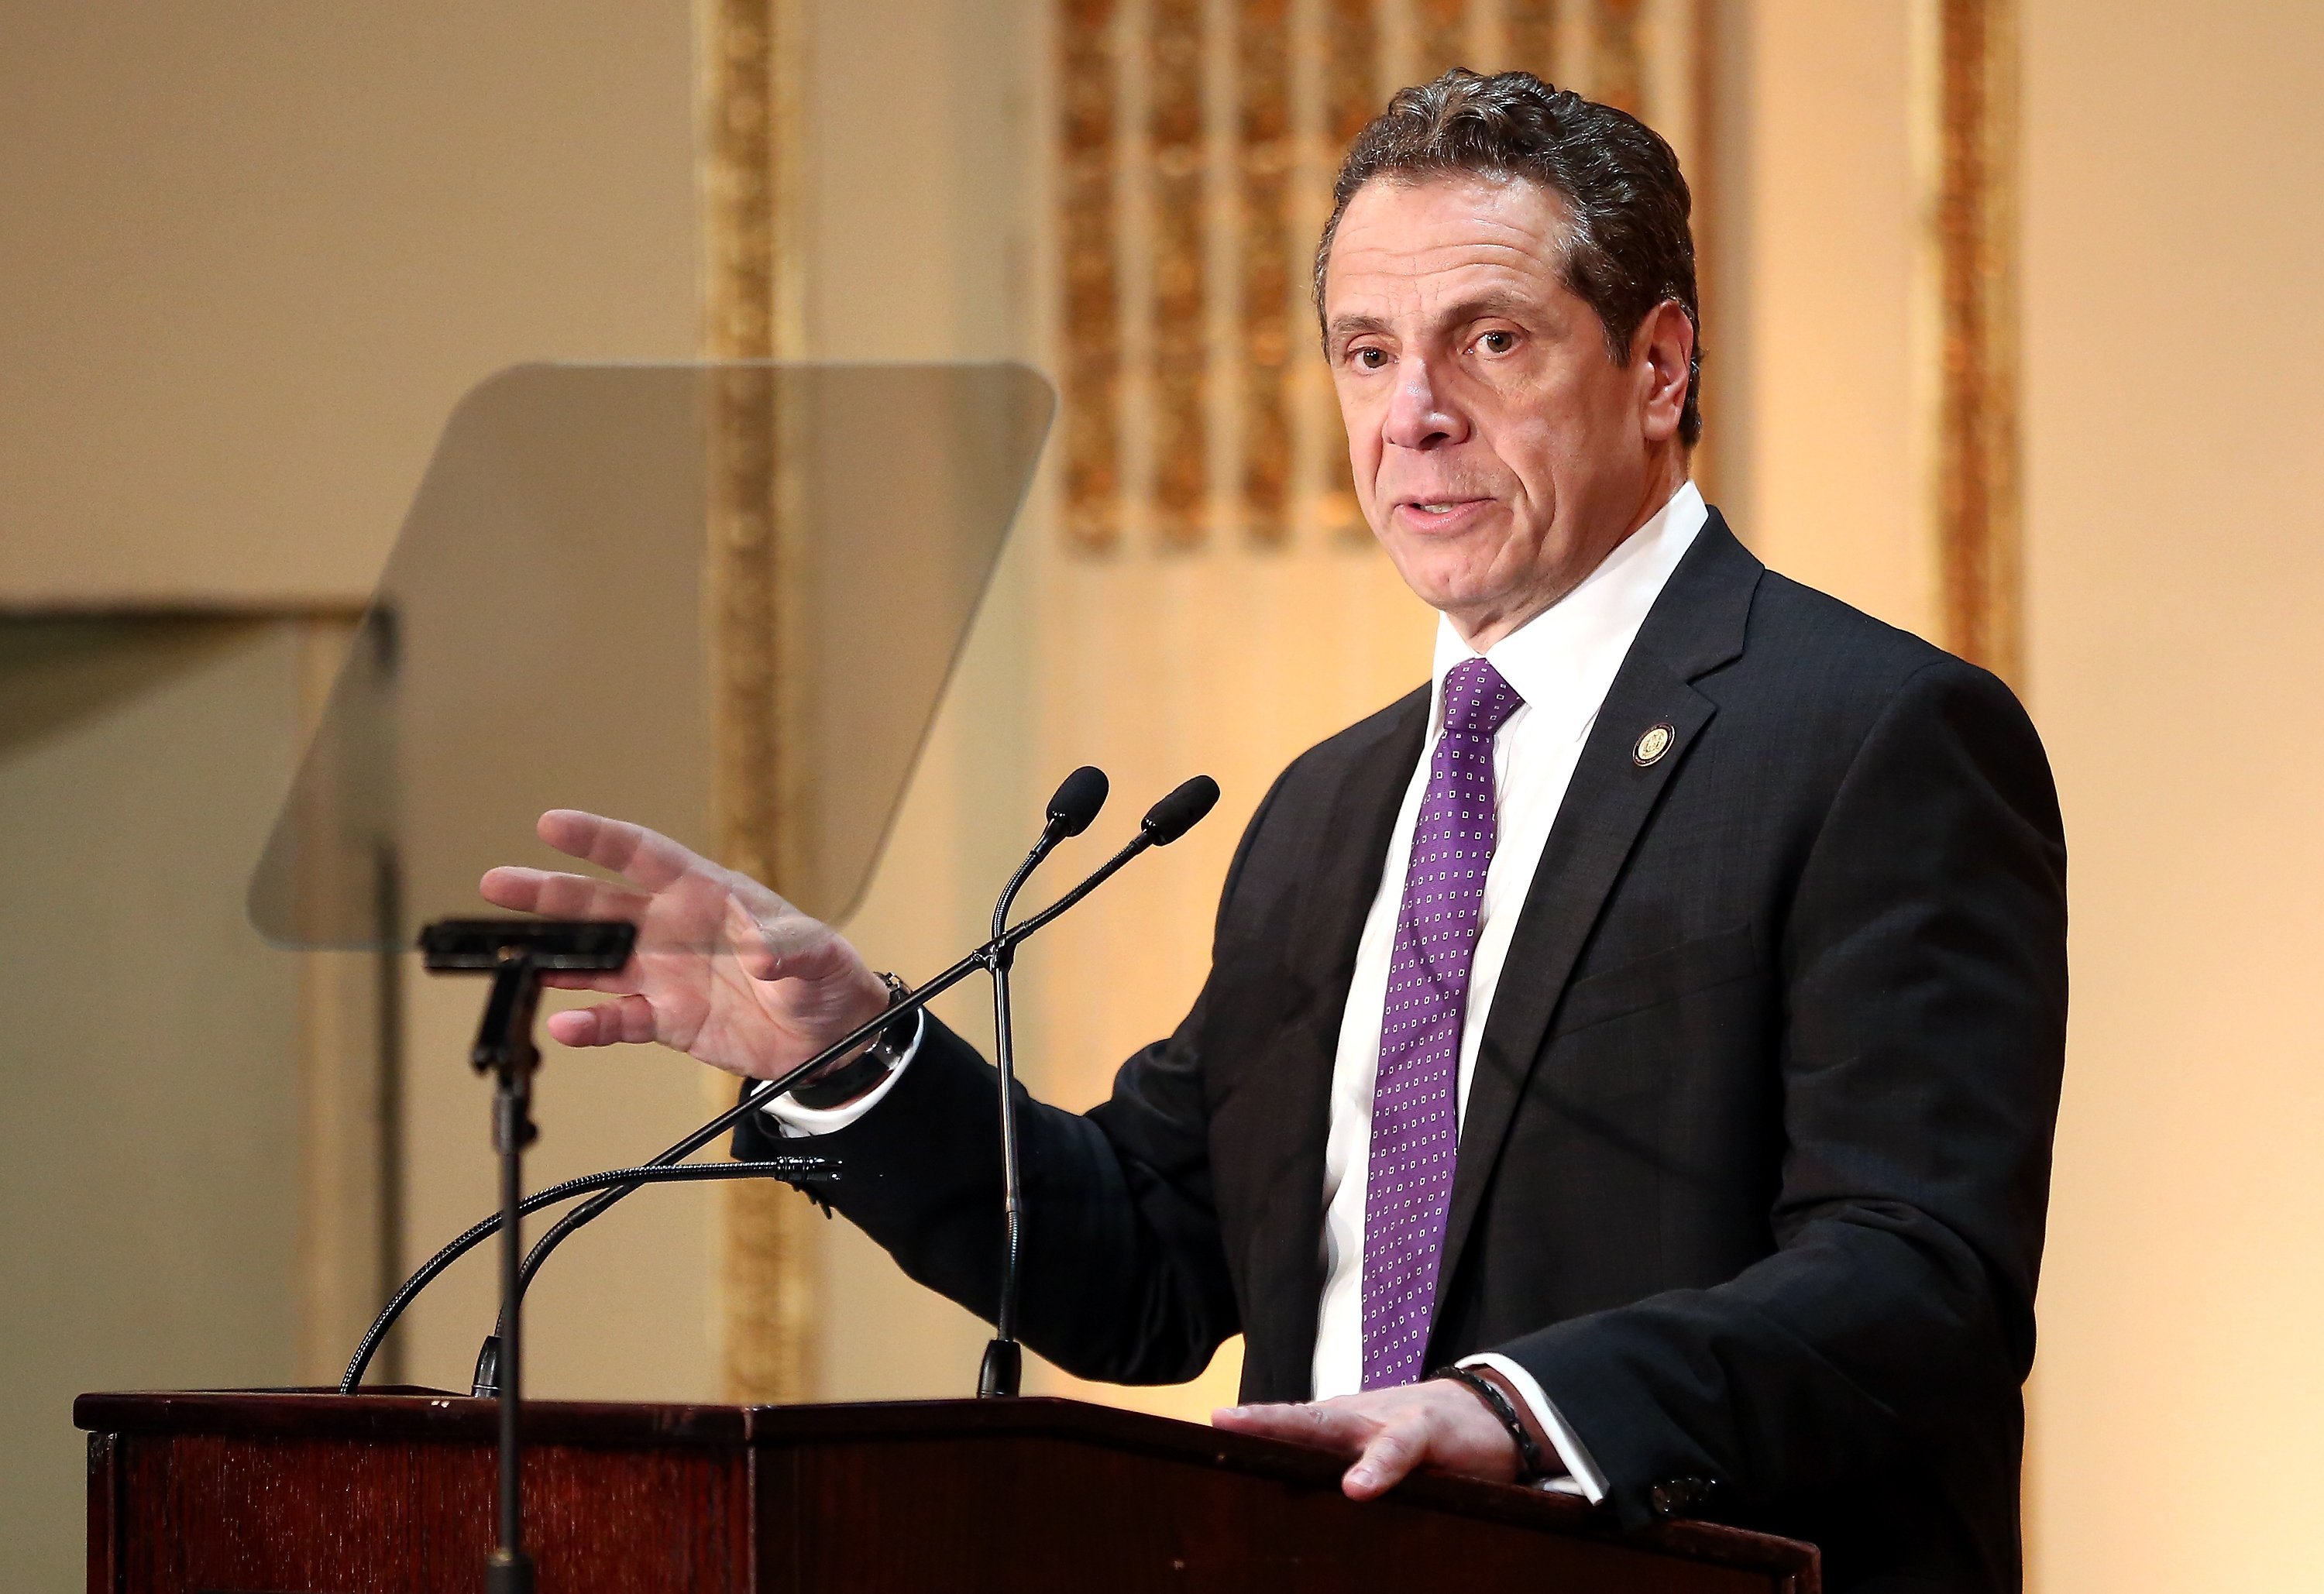 New York Governor Andrew Cuomo during his 2017 speaking engagement in a hotel in new York City. | Photo: Getty Images